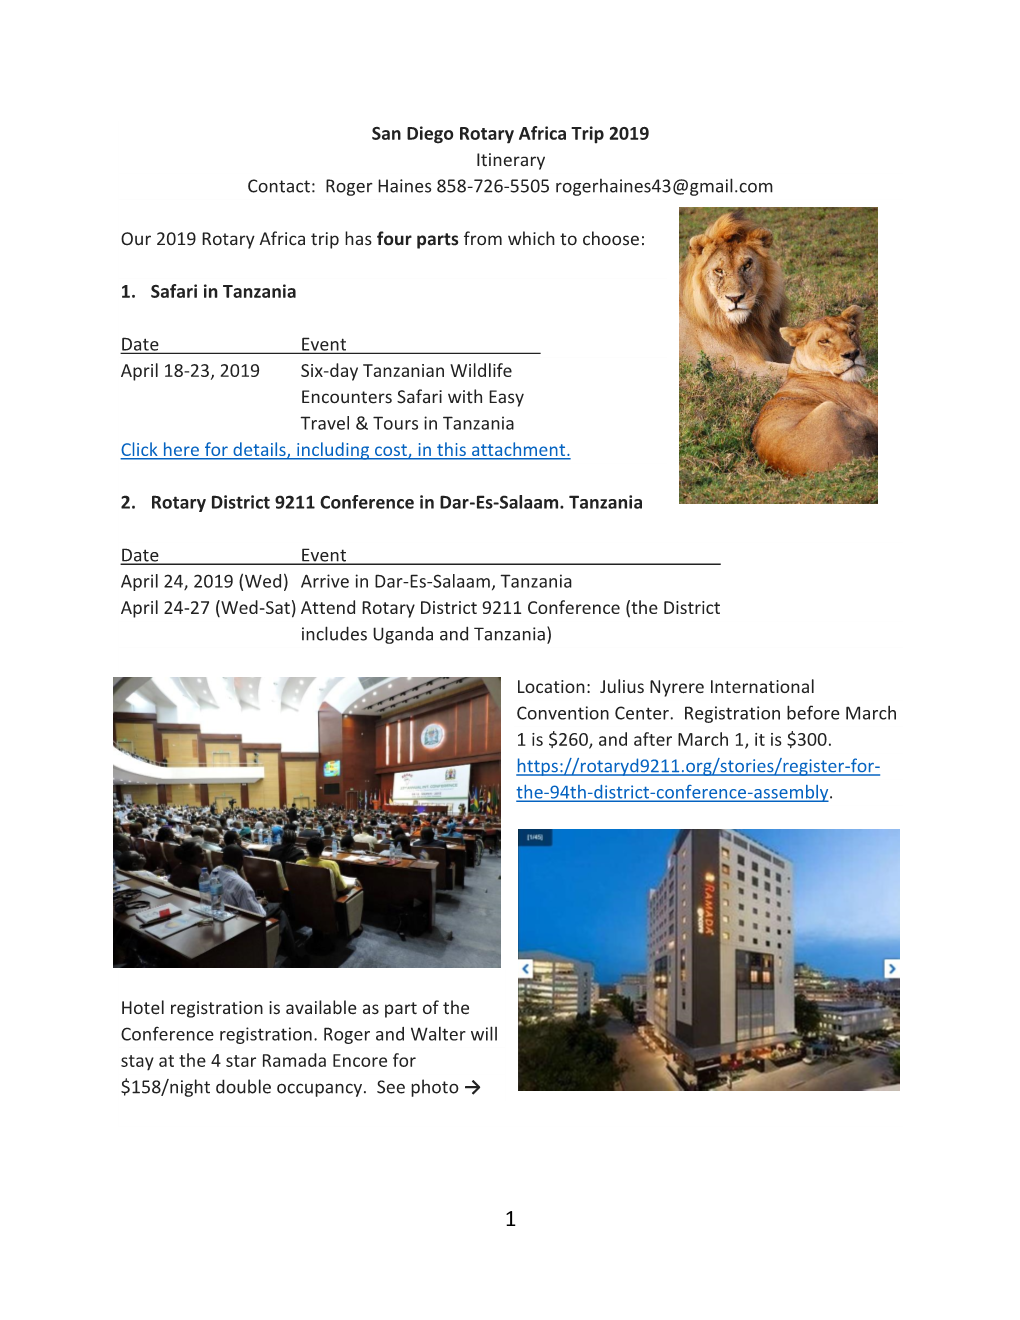 San Diego Rotary Africa Trip 2019 Itinerary Contact: Roger Haines 858-726-5505 Rogerhaines43@Gmail.Com